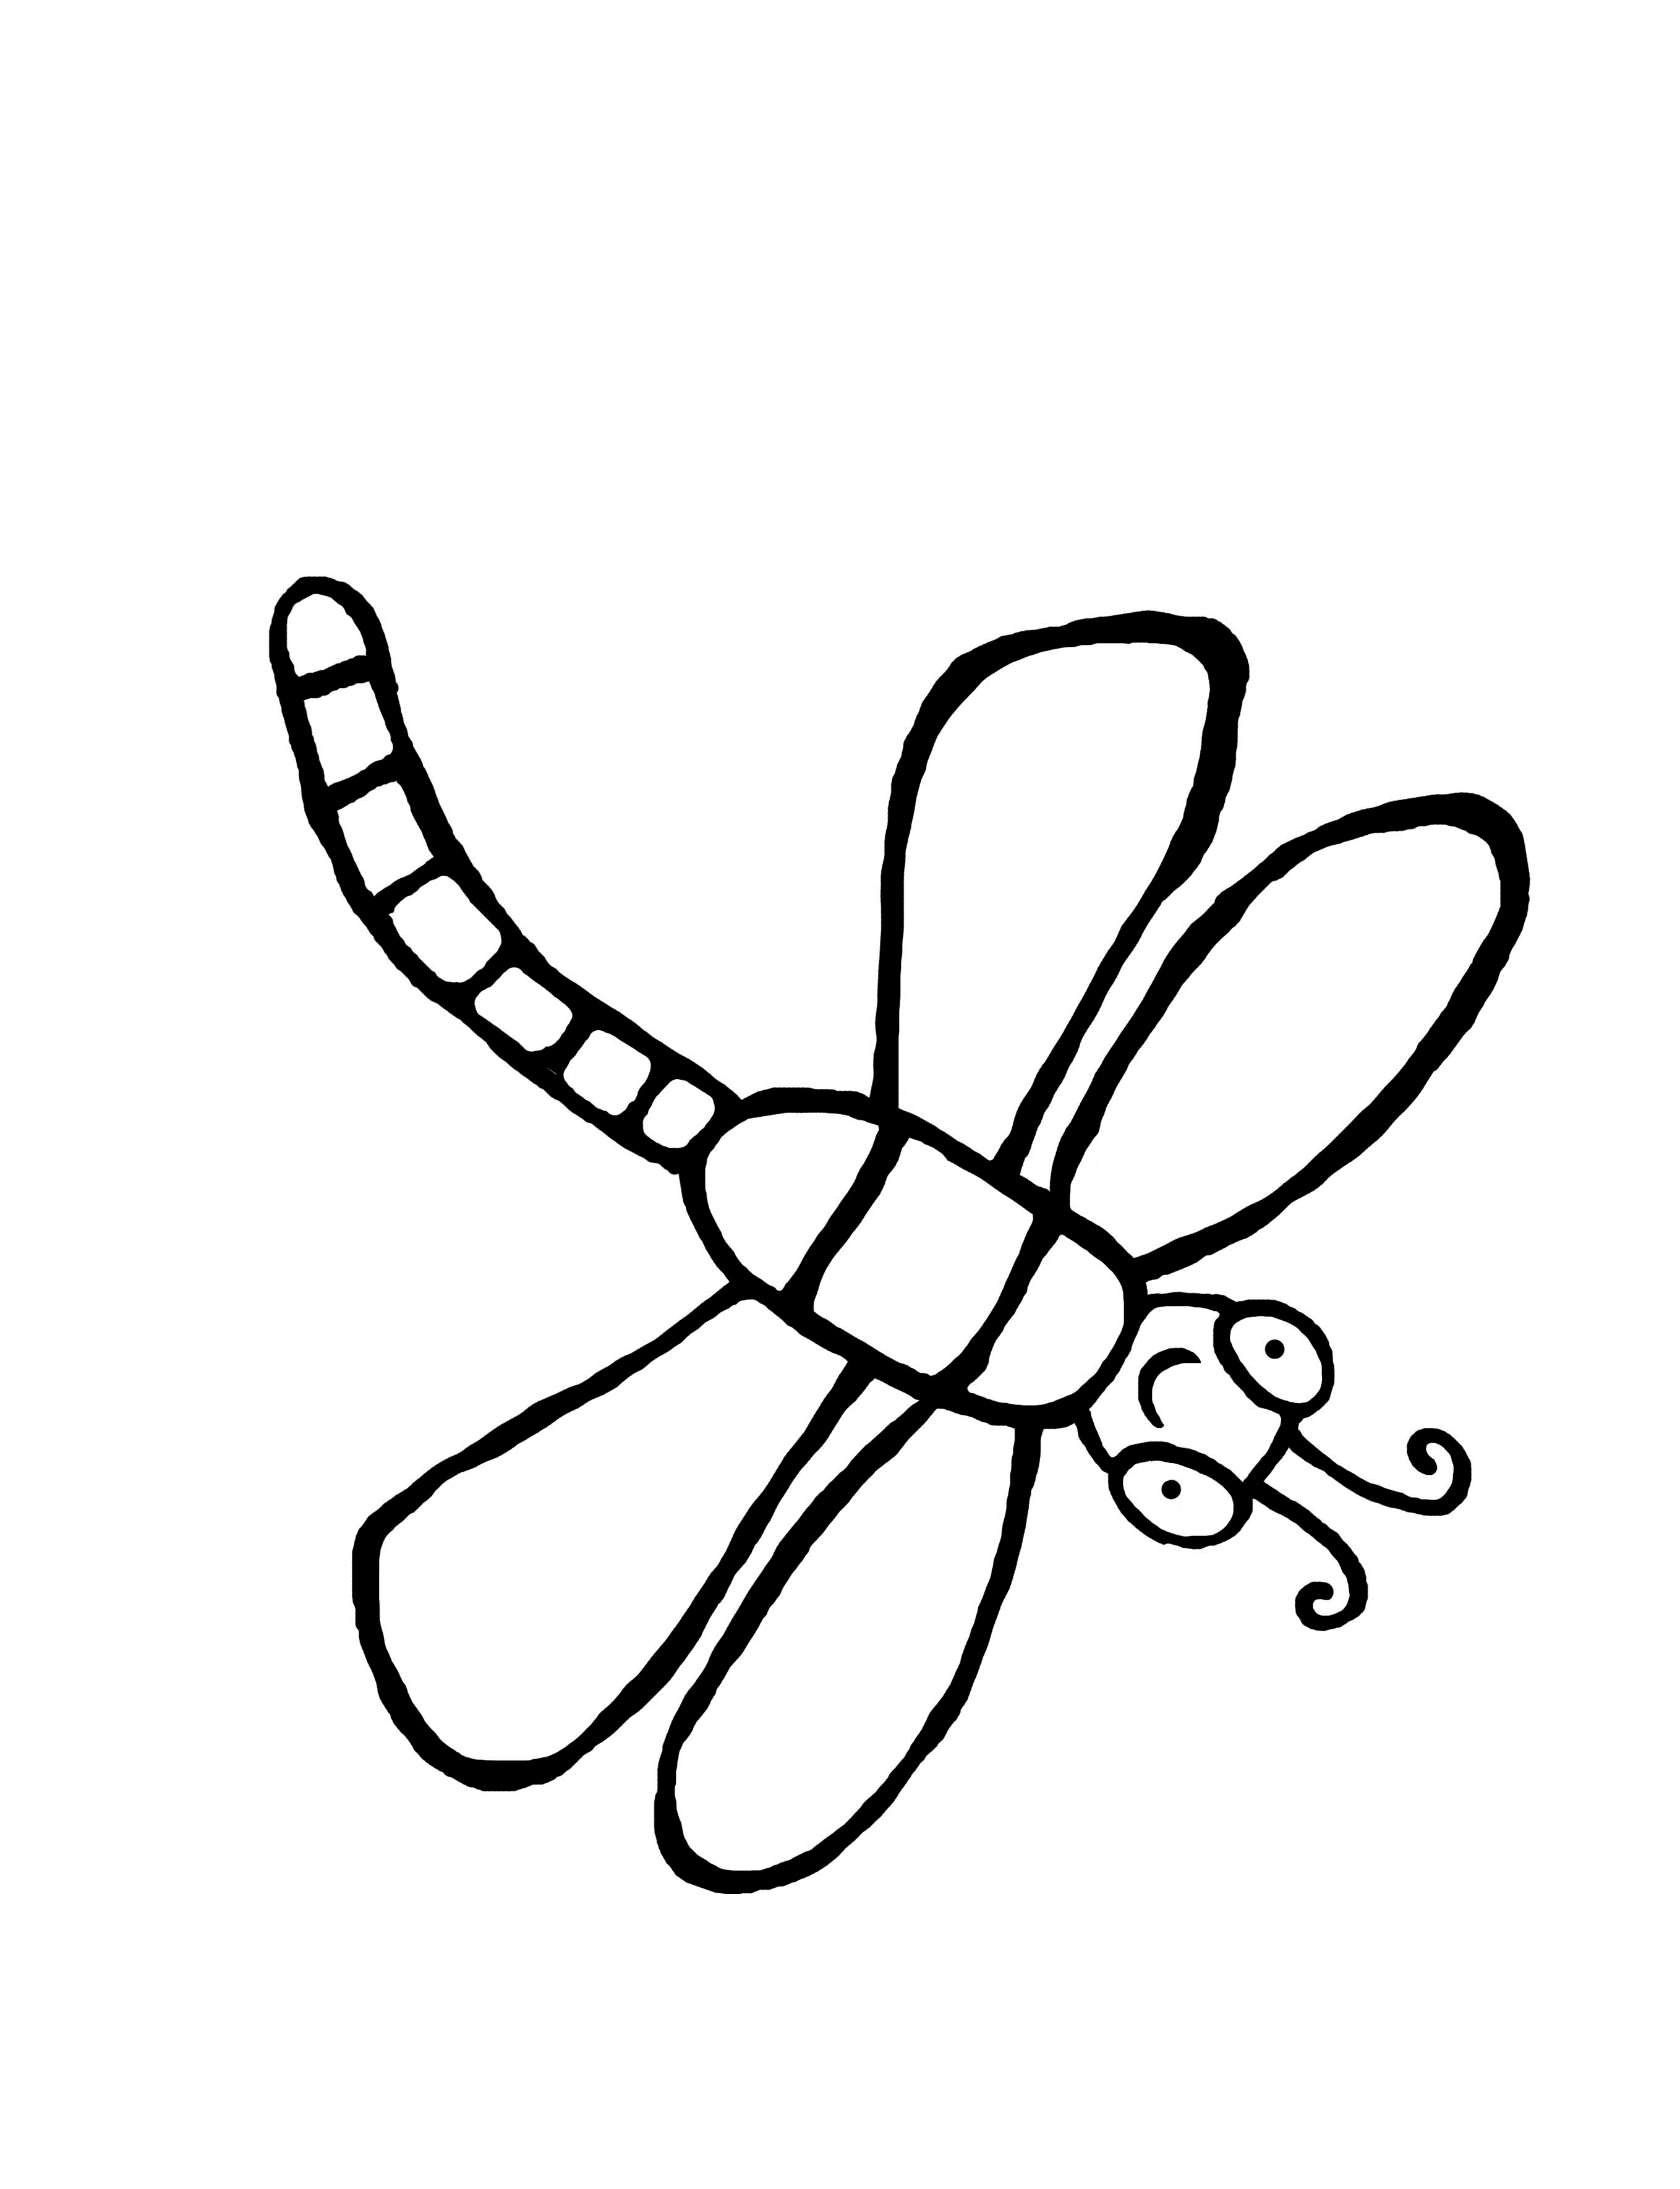 Clip Arts Related To : dragonfly clip art black and white. 